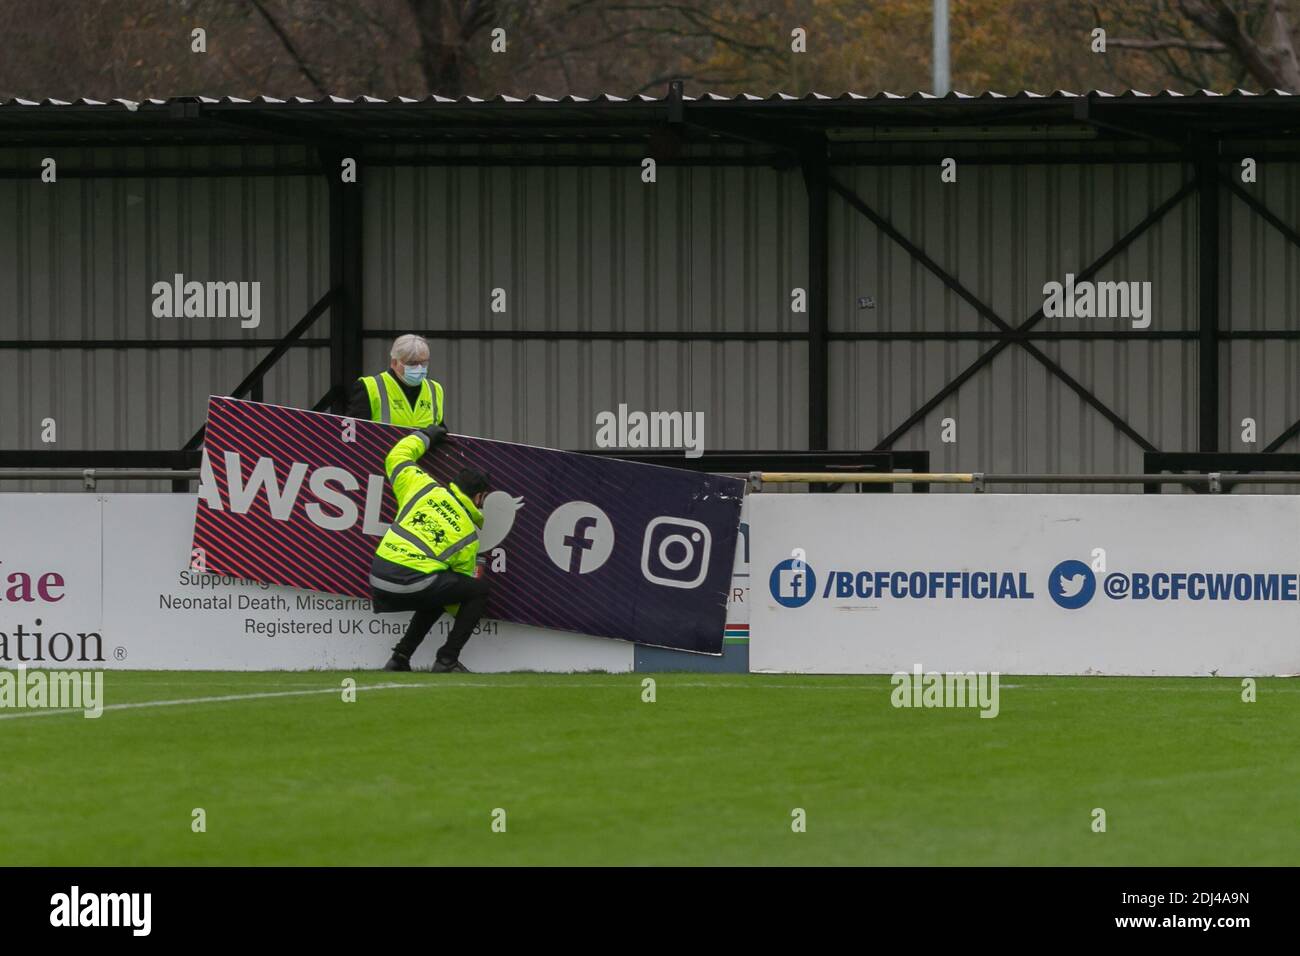 Solihull, West Midlands, UK. 13th Dec, 2020. Rain has caused the postponement of the Womens Super League match between Birmingham City women and Everton FC women at Solihull Moors ground. Staff demount the WSL hoardings. Credit: Peter Lopeman/Alamy Live News Stock Photo